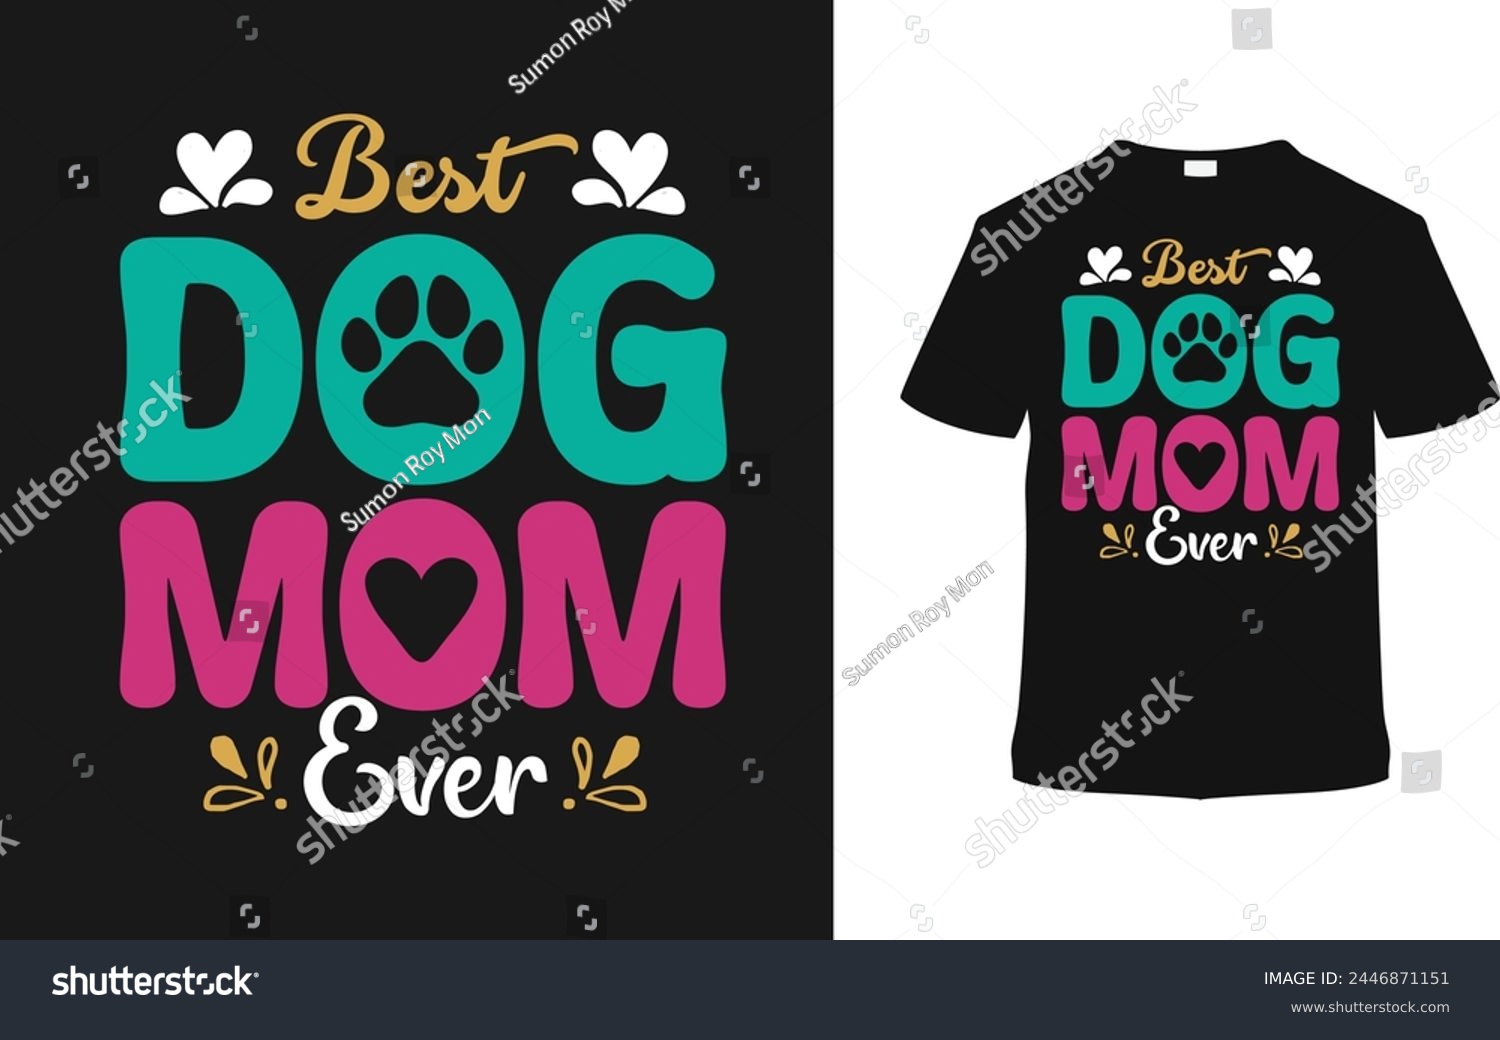 SVG of Best Dog Mom Ever Mothers Day T shirt Design, vector illustration, graphic template, print on demand, typography, vintage, eps 10, textile fabrics, retro style, element, apparel, mom tee, dog t-shirt svg